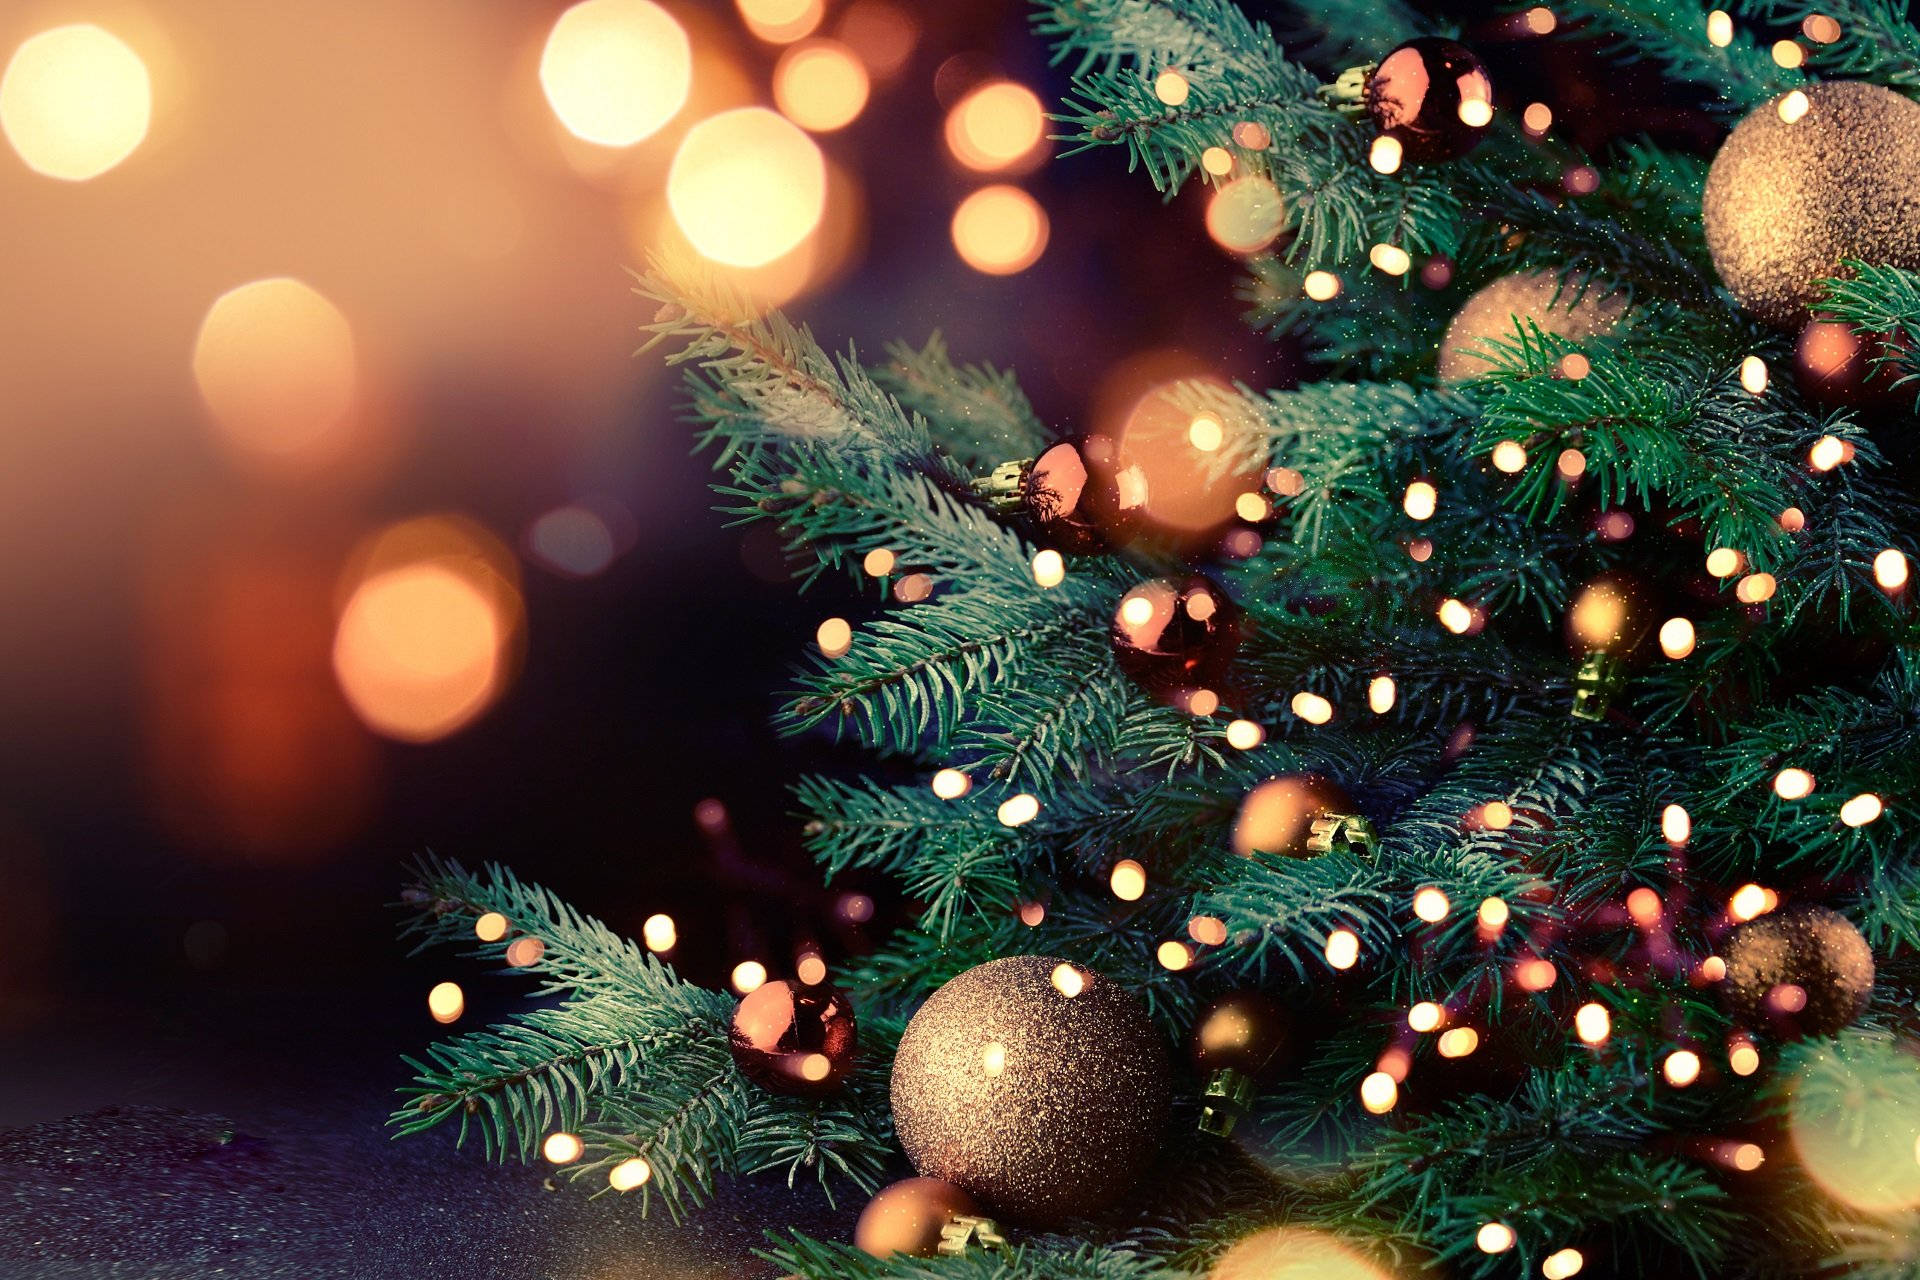 Celebrate the Holidays in Style with a Christmas Widescreen Wallpaper